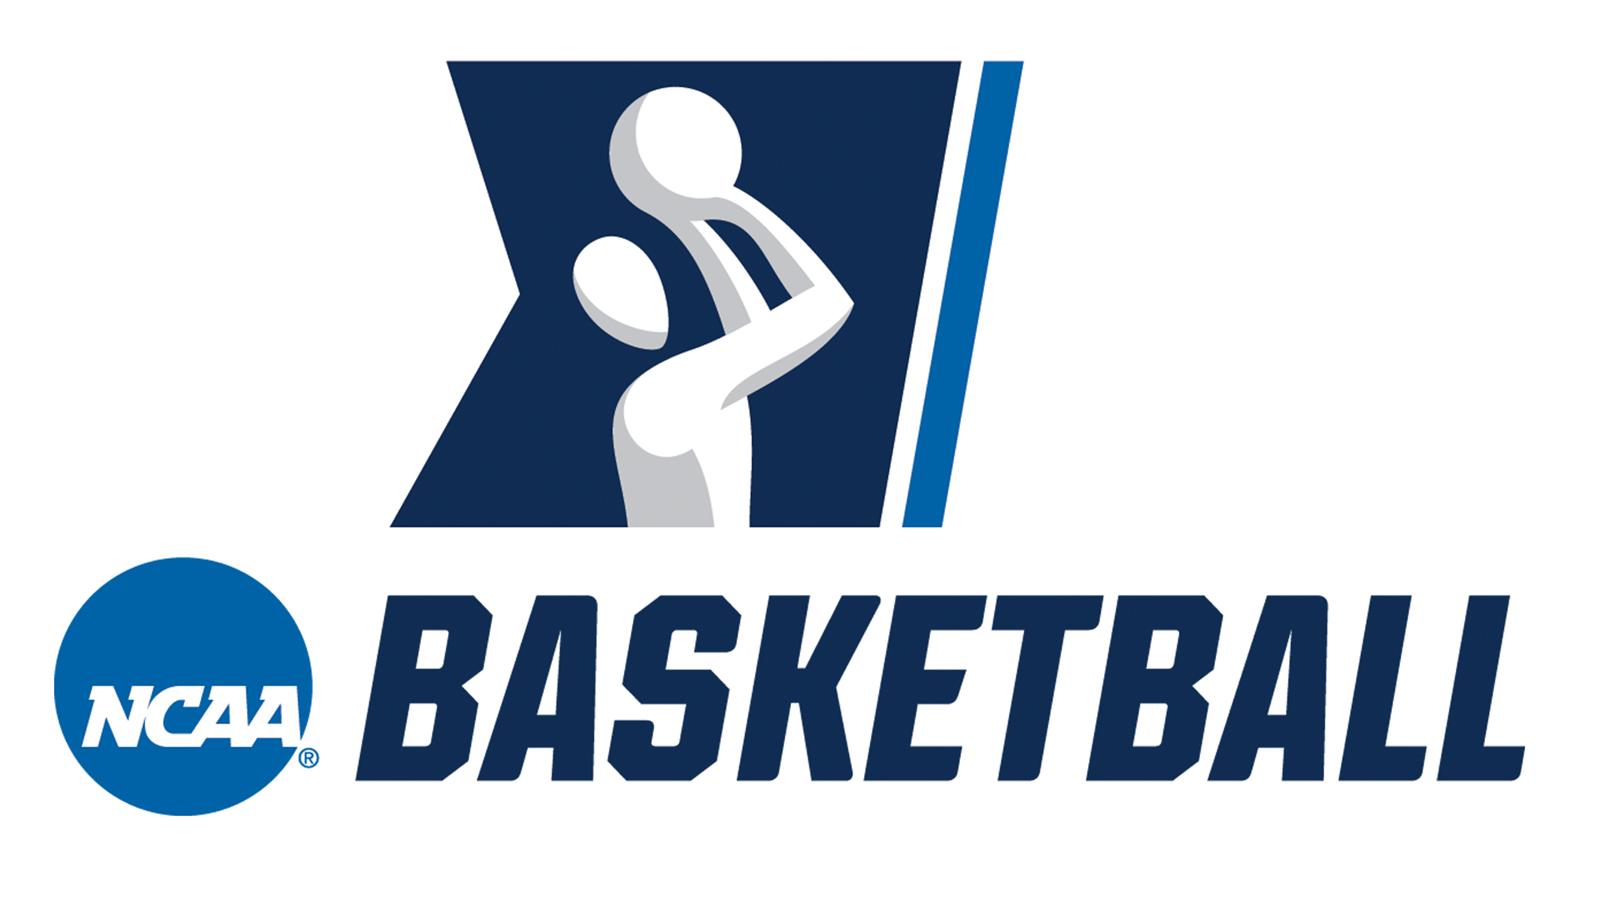 NCAA Men's Basketball Tournament: Rounds 1 & 2 - All Sessions Pass at MVP Arena